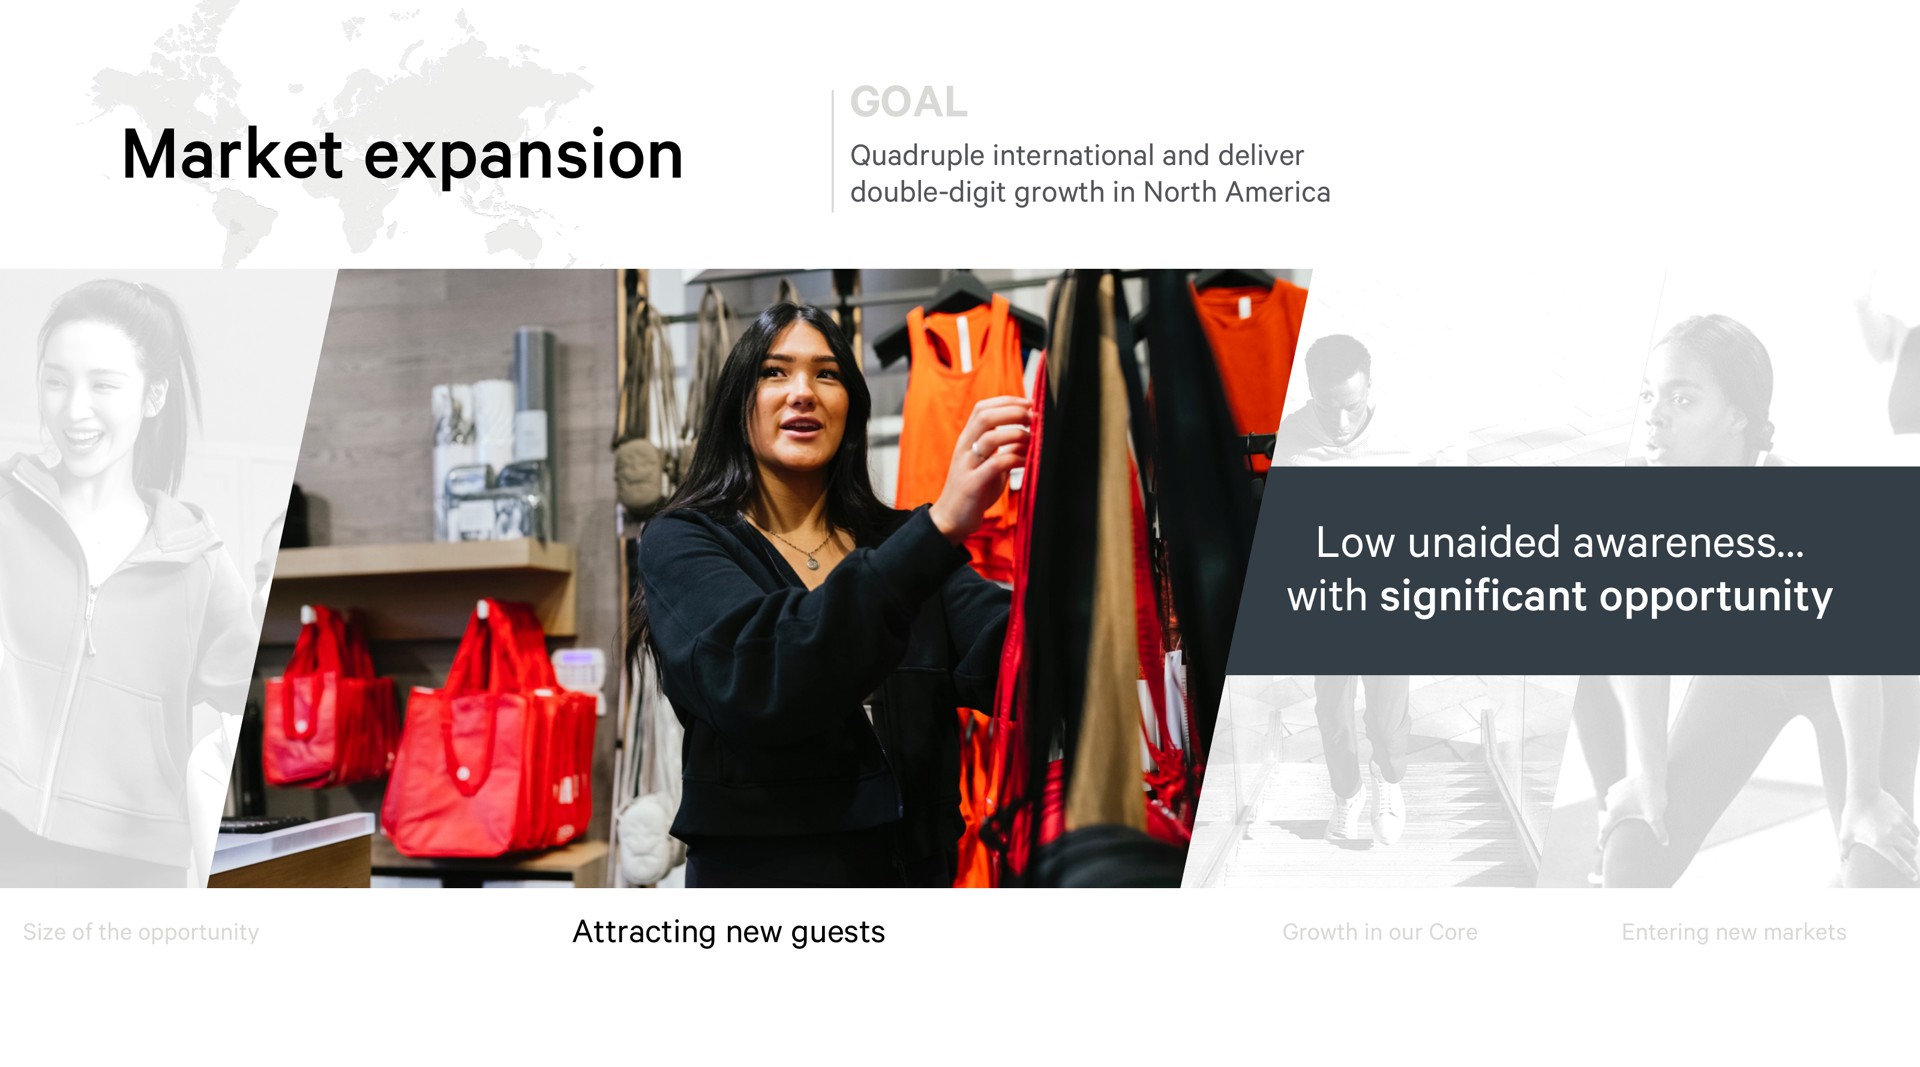 market expansion goal low unaided awareness with significant opportunity | Lululemon